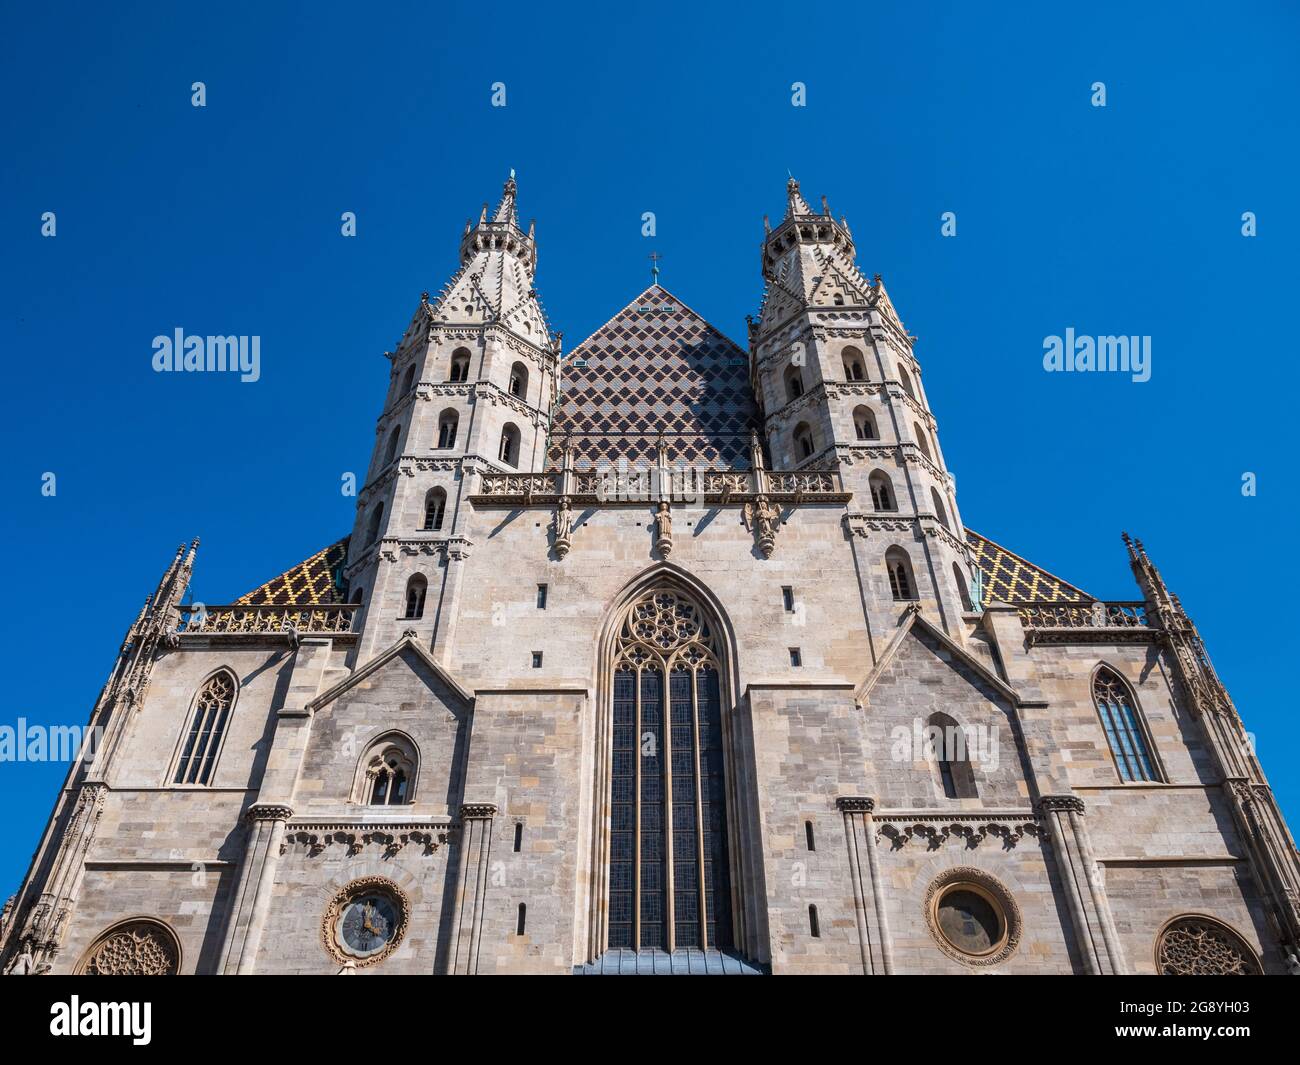 Saint Stephens Cathedral or Stephansdom in Vienna, Austria, West Front with Romanesque Towers. Stock Photo